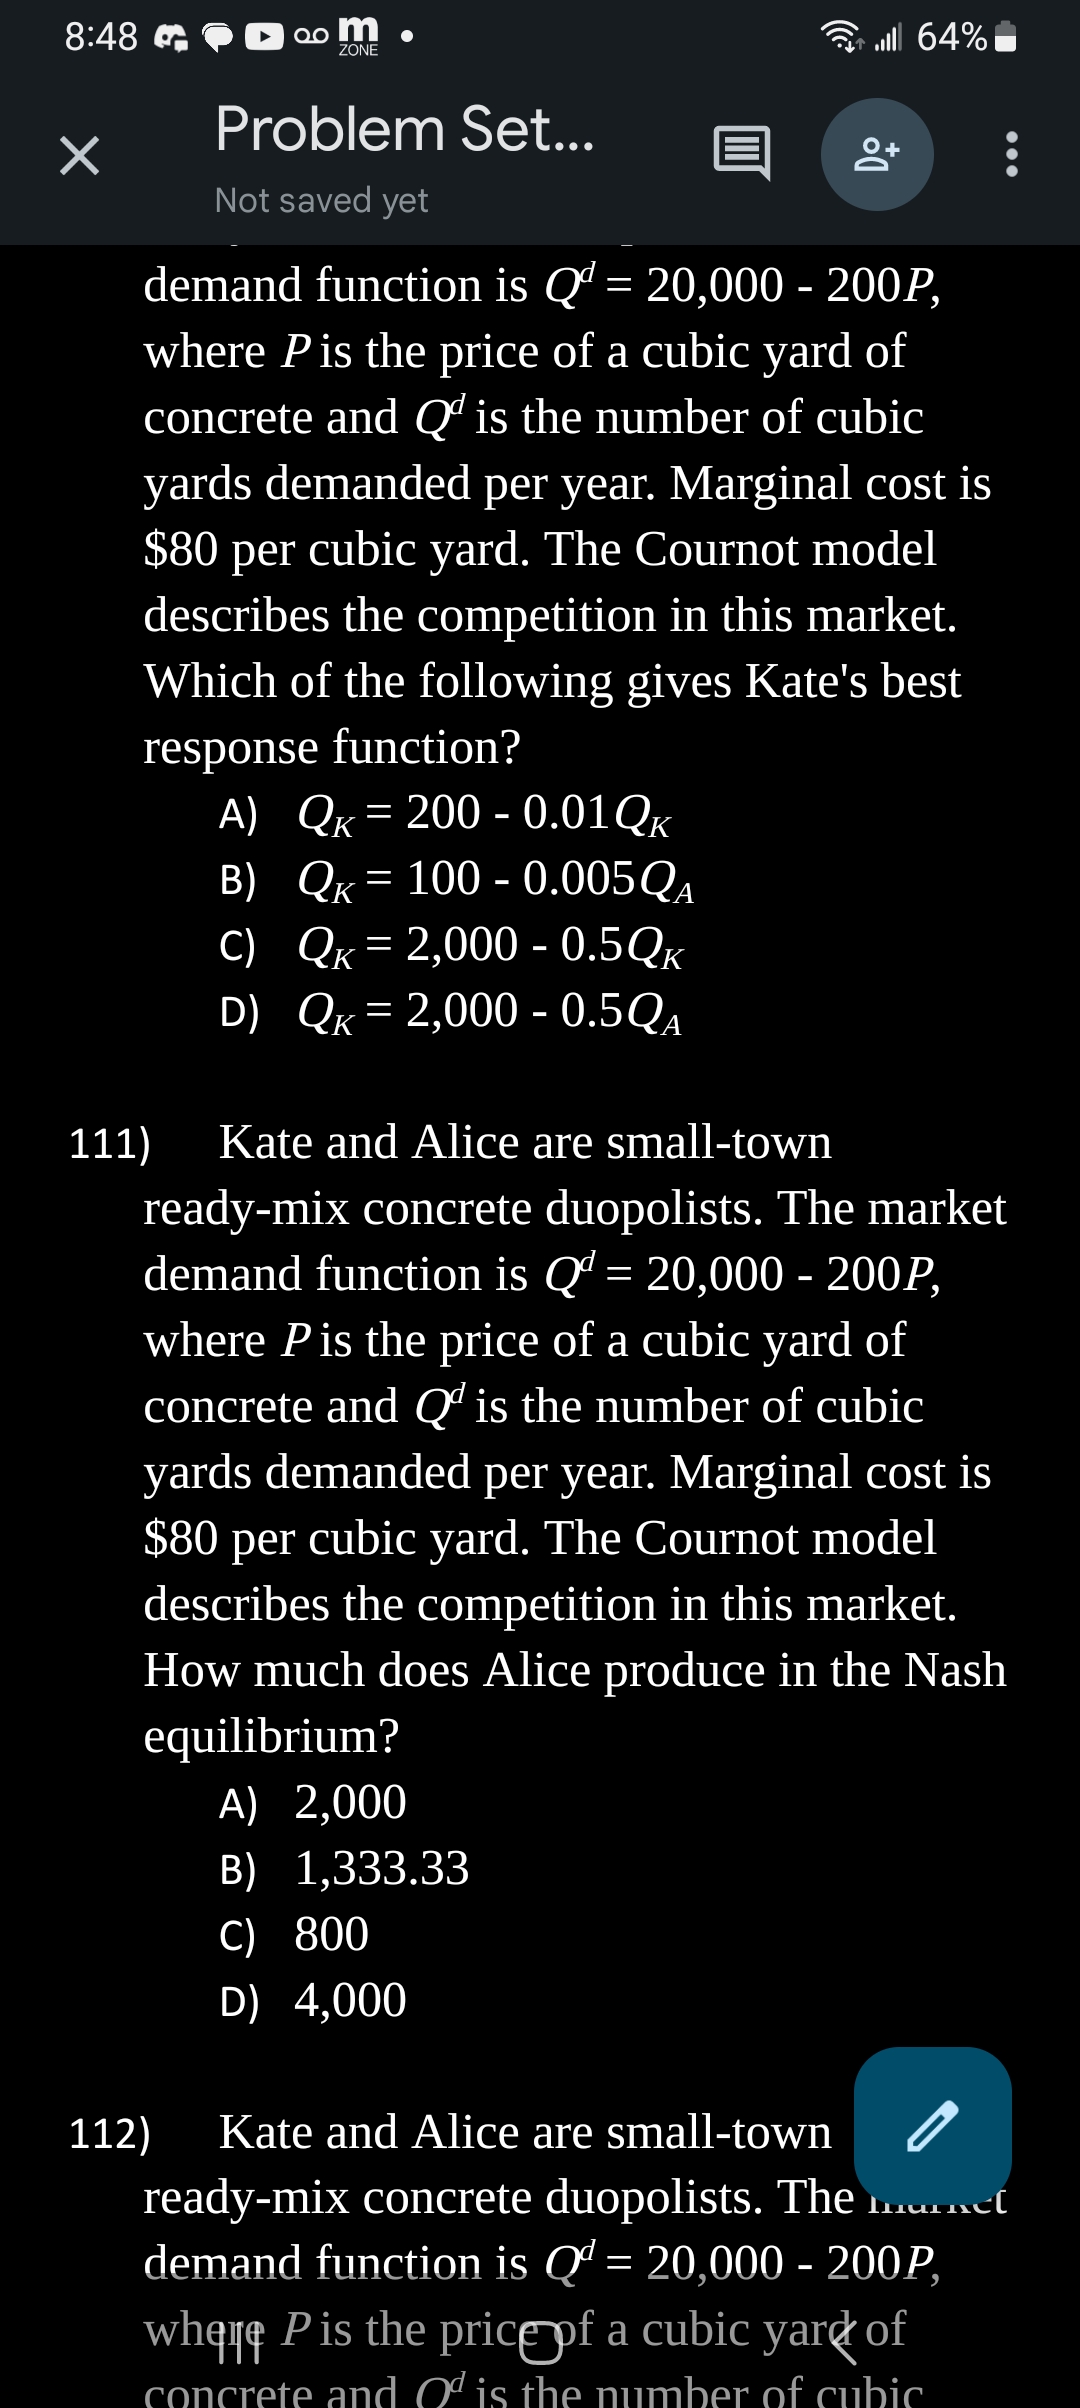 8:48
×
20 m
ZONE
Problem Set...
Not saved yet
. 64%
+0
demand function is Qd = 20,000 - 200P,
where P is the price of a cubic yard of
concrete and Q is the number of cubic
yards demanded per year. Marginal cost is
$80 per cubic yard. The Cournot model
describes the competition in this market.
Which of the following gives Kate's best
response function?
A) QK = 200 -0.01Qk
B)
QK = 100 - 0.005 QA
C)
QK = 2,000 - 0.5QK
QK = 2,000 - 0.5QA
D)
A) 2,000
B) 1,333.33
C) 800
D) 4,000
111) Kate and Alice are small-town
ready-mix concrete duopolists. The market
demand function is Q = 20,000 - 200P,
where P is the price of a cubic yard of
concrete and Q is the number of cubic
yards demanded per year. Marginal cost is
$80 per cubic yard. The Cournot model
describes the competition in this market.
How much does Alice produce in the Nash
equilibrium?
112) Kate and Alice are small-town
ready-mix concrete duopolists. The market
demand function is Qª = 20,000 - 200P,
where P is the price of a cubic yard of
concrete and O is the number of cubic